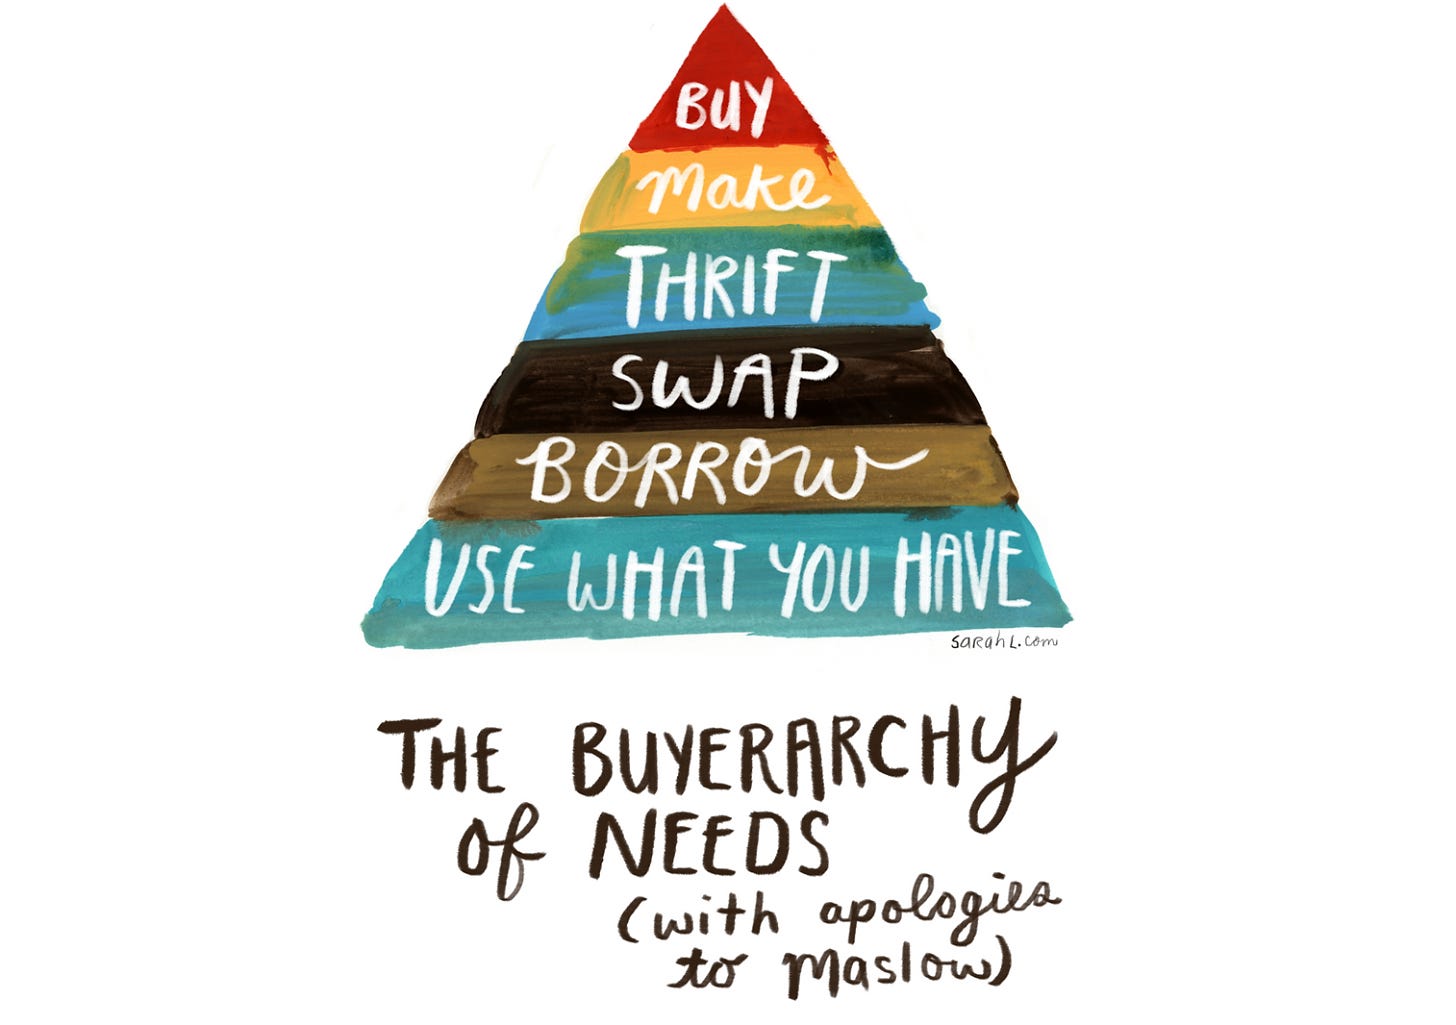 An illustration of the buyerarchy of needs (with apologies to maslow). It is a pyramid shape with a base saying use what you have. The next layer up says borrow.  The next layer is swap, followed by thrift then make and the top of the pyramid says buy.